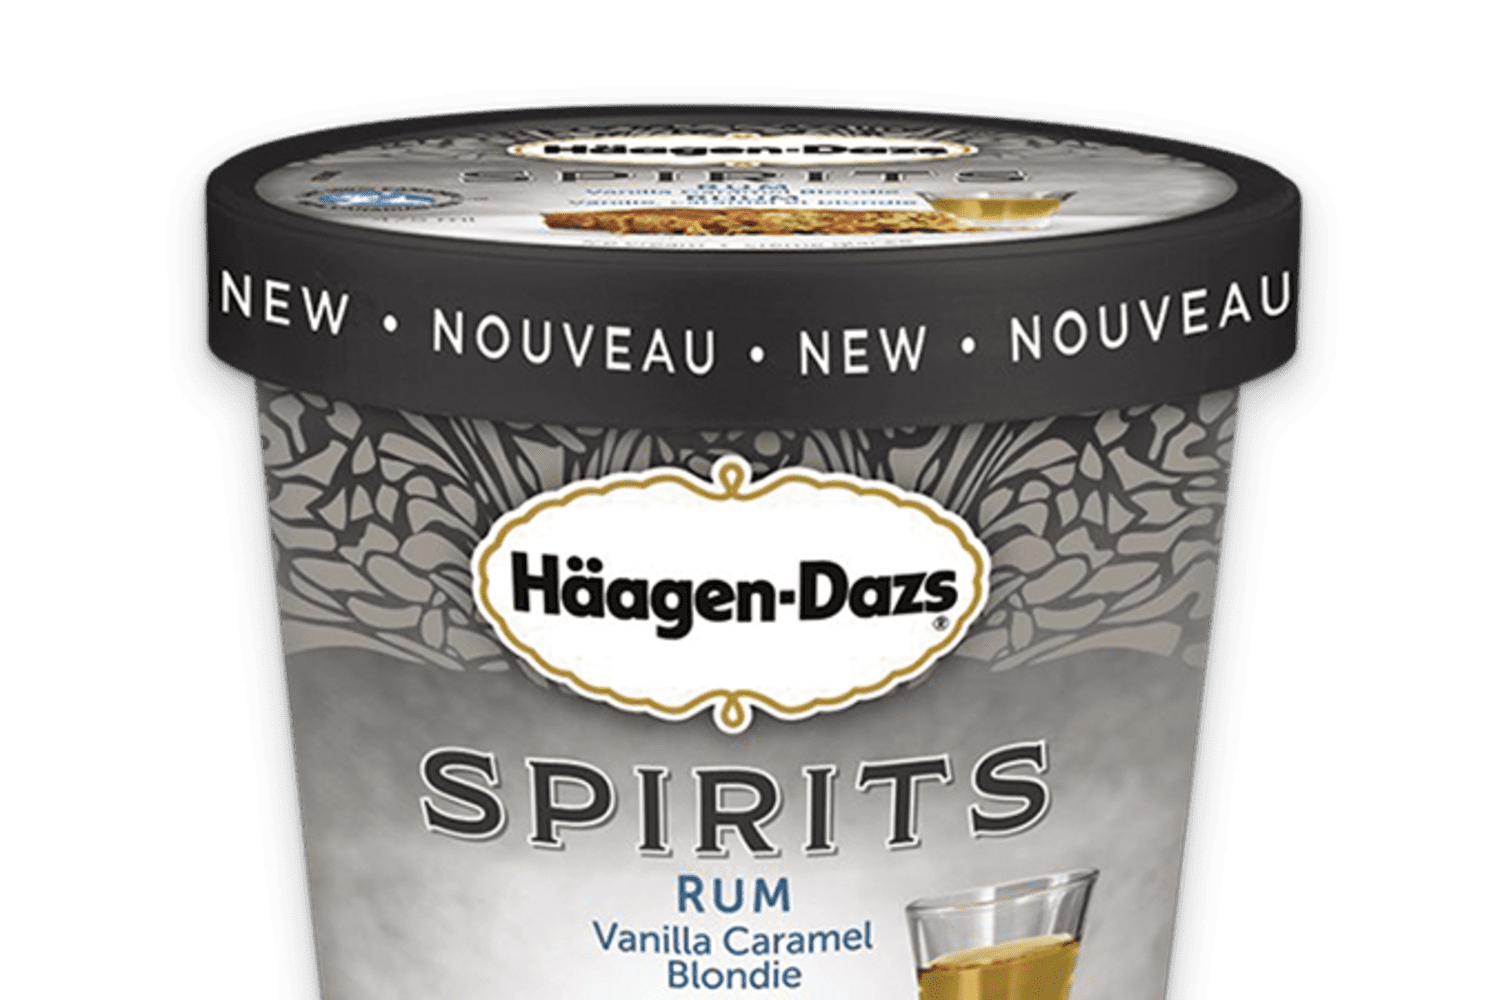 Häagen-Dazs Has Alcohol-Infused Ice Cream - The Kitchn